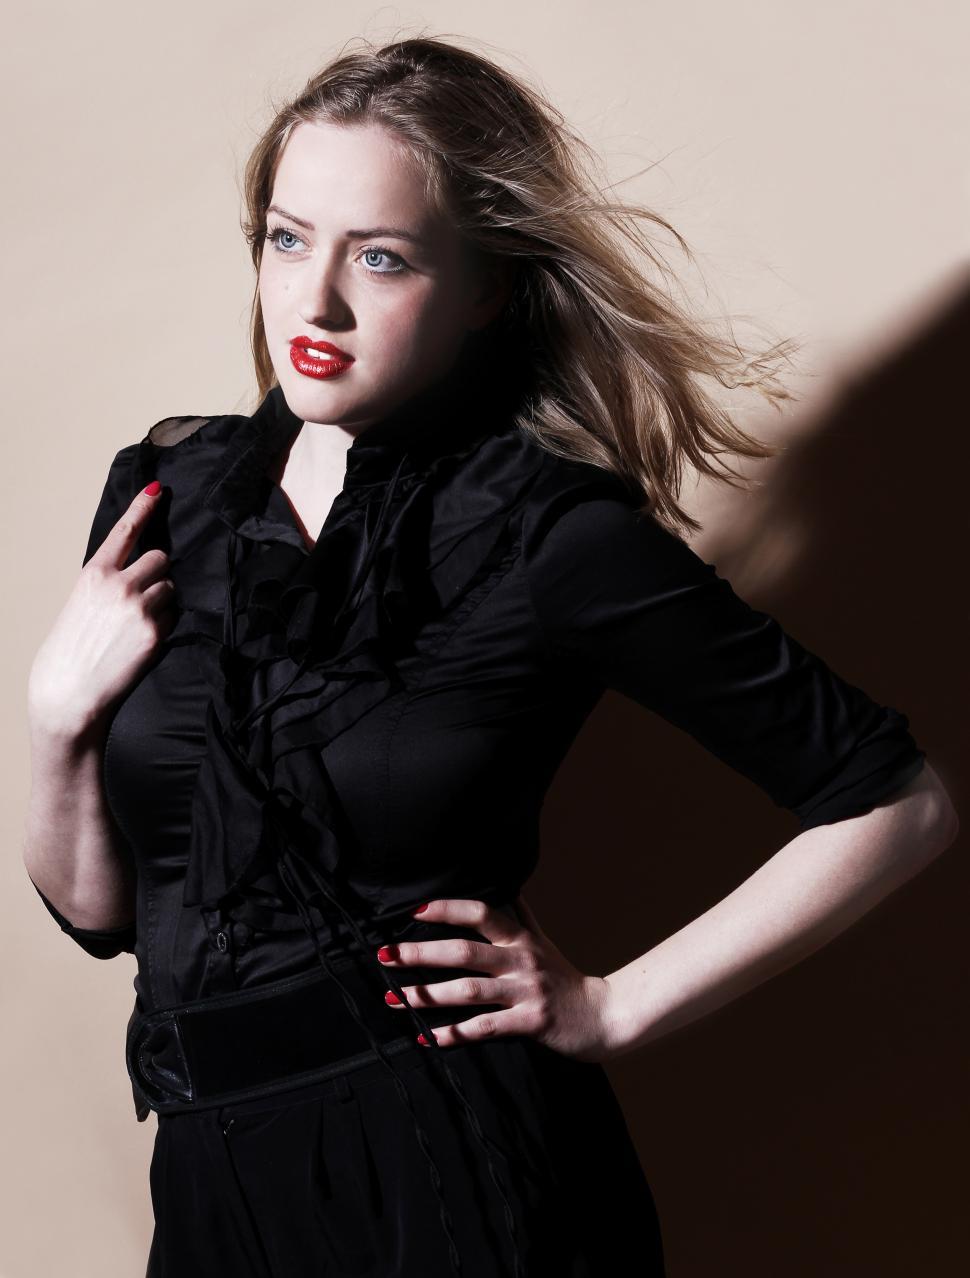 Free Image of Young woman wearing all black in studio 